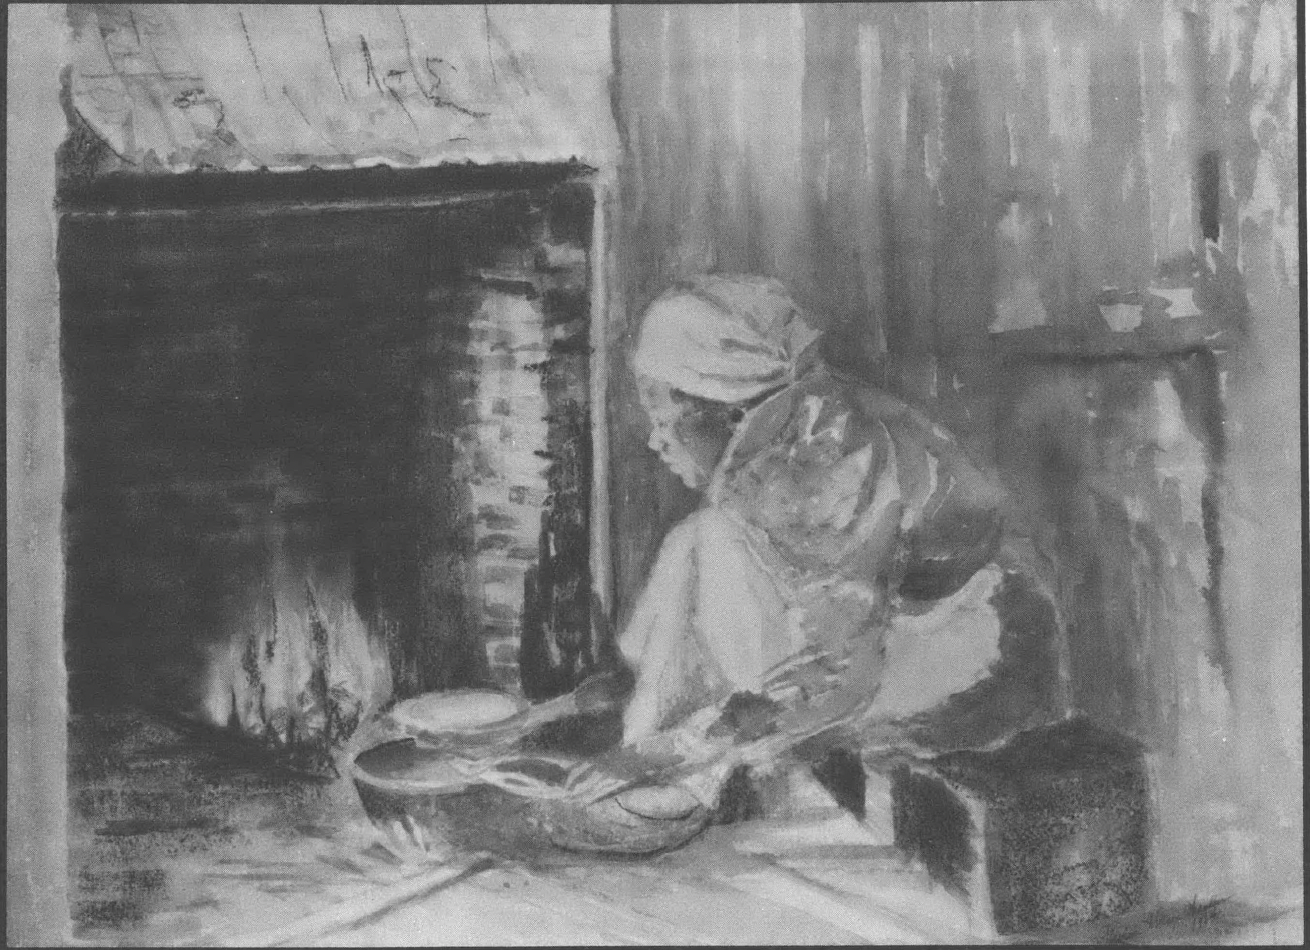 Black and white watercolor image of Black woman in headscarf tending a fire